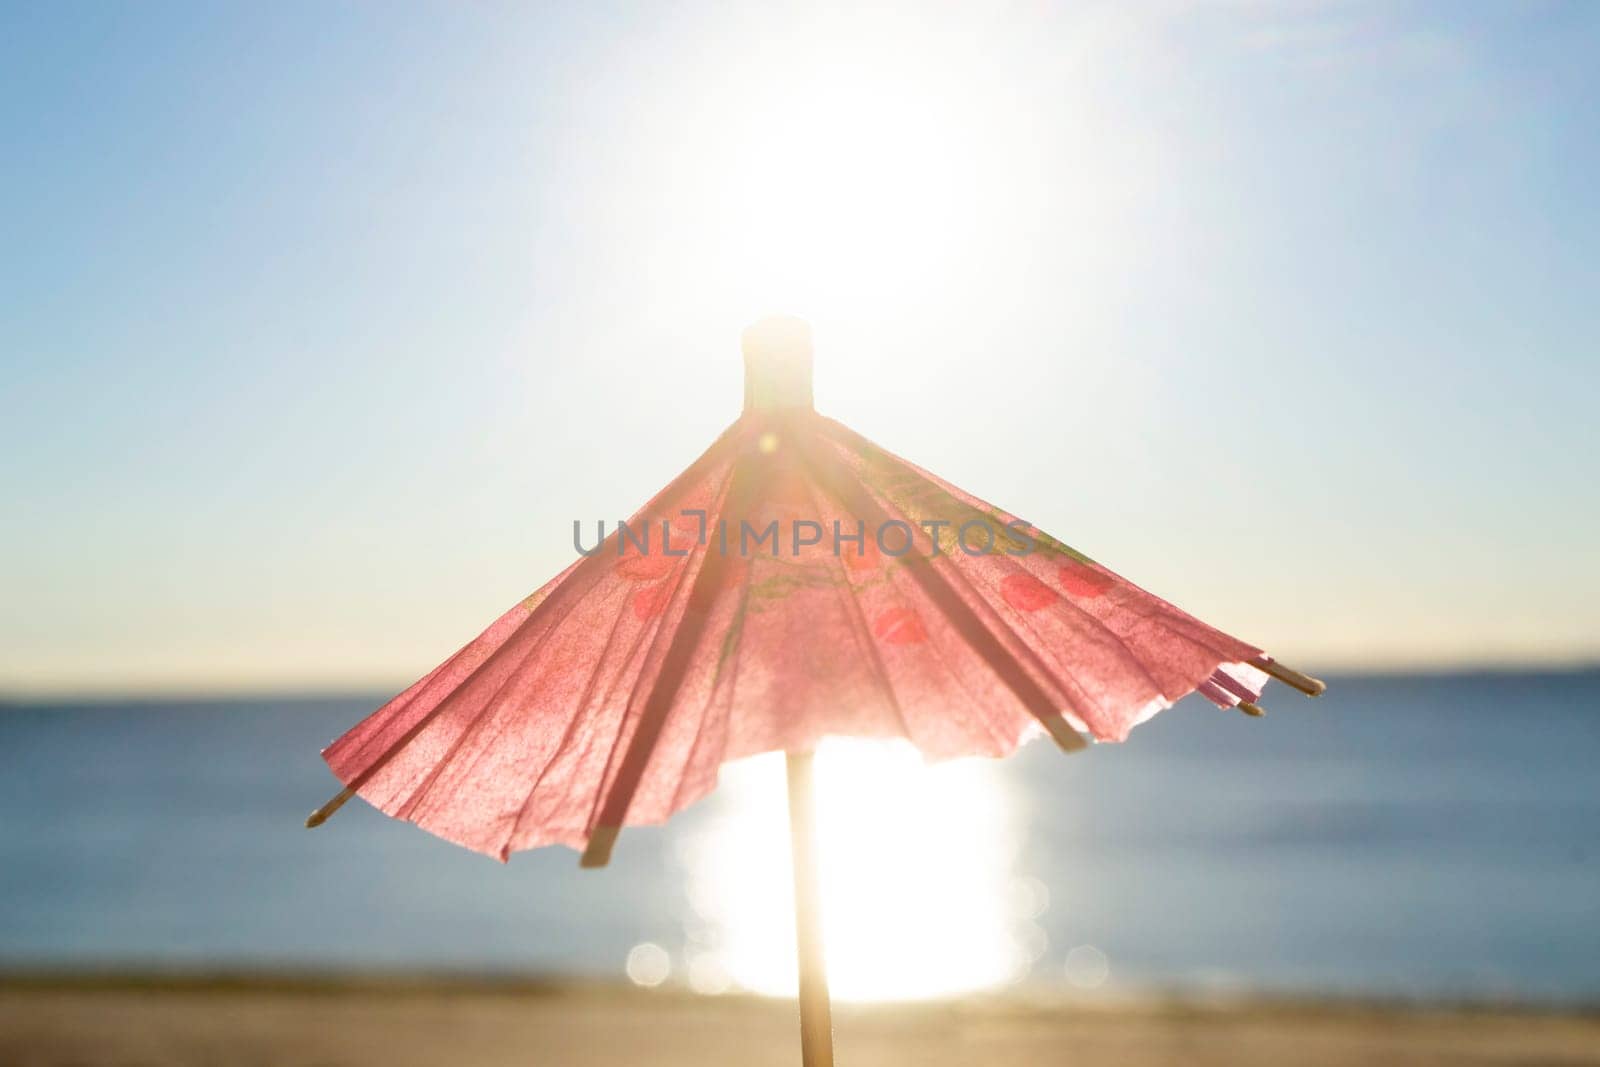 One red paper umbrellas cocktail decorations on background of blue sky, brightly shining sun and sunny path on surface of blue sea. Concept of summer, sea, vacation, travel tourism